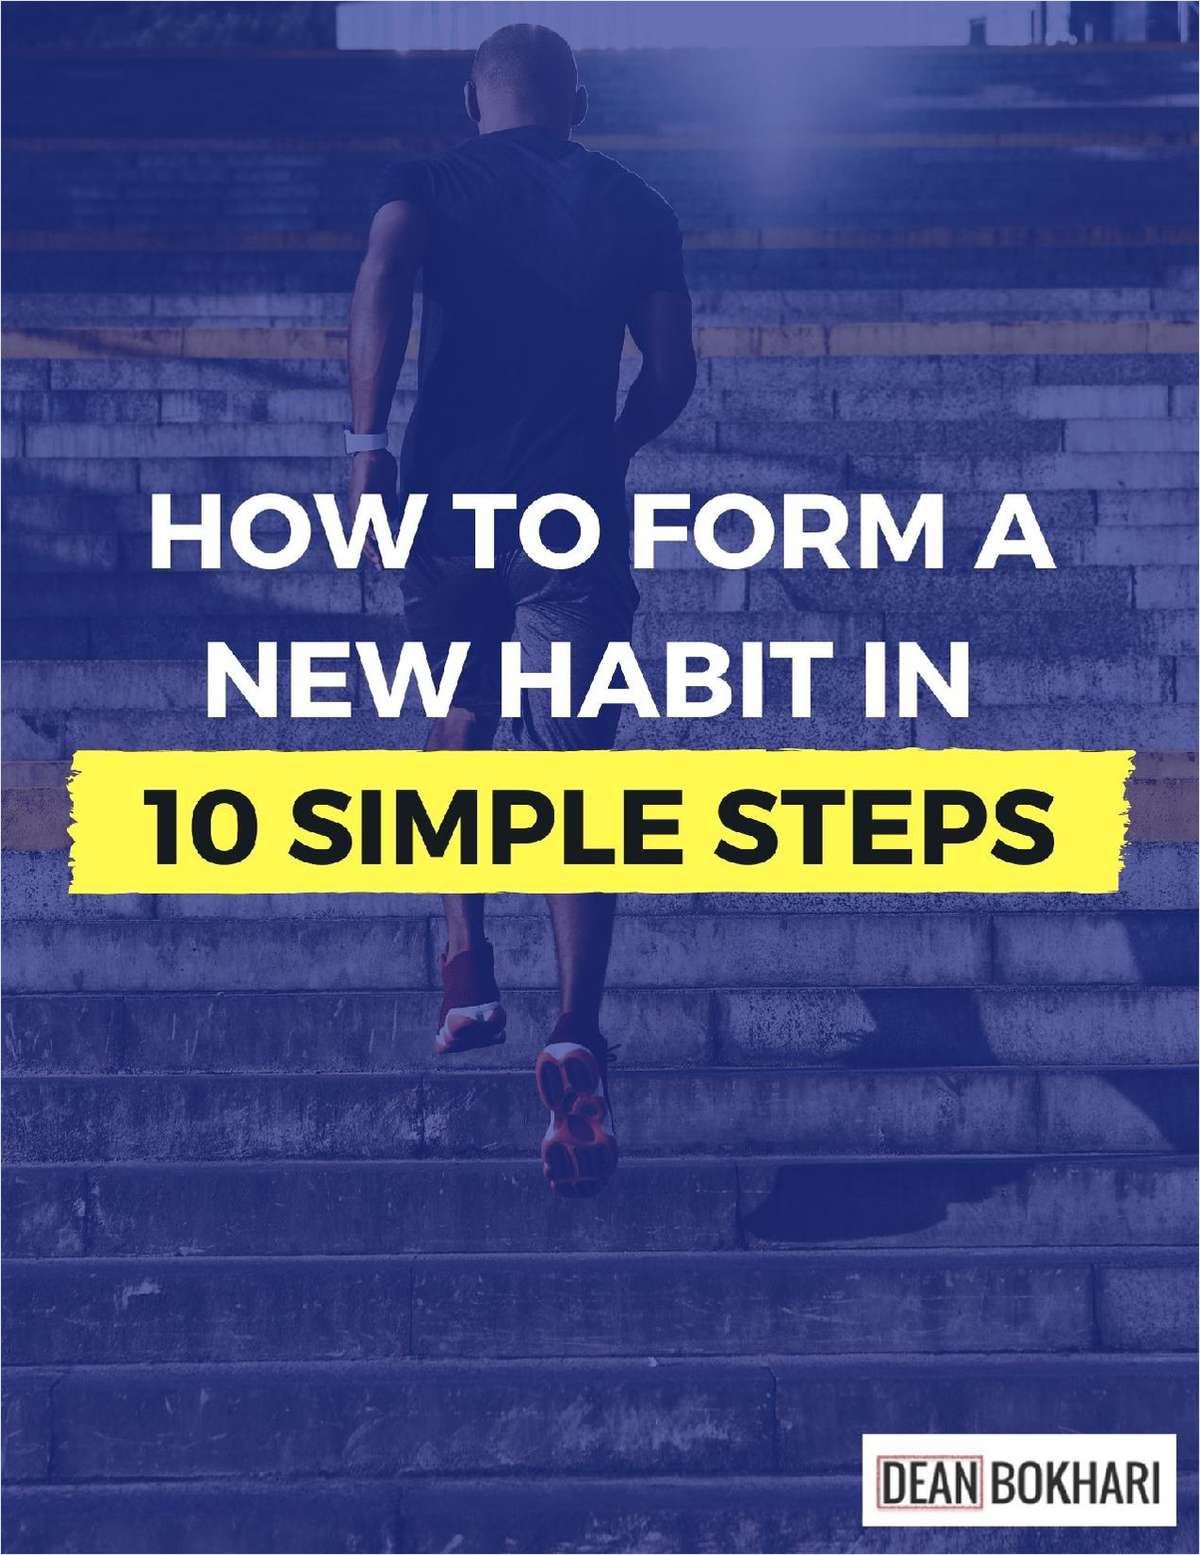 how-to-form-a-new-habit-in-10-simple-steps-free-dean-bokhari-tips-and